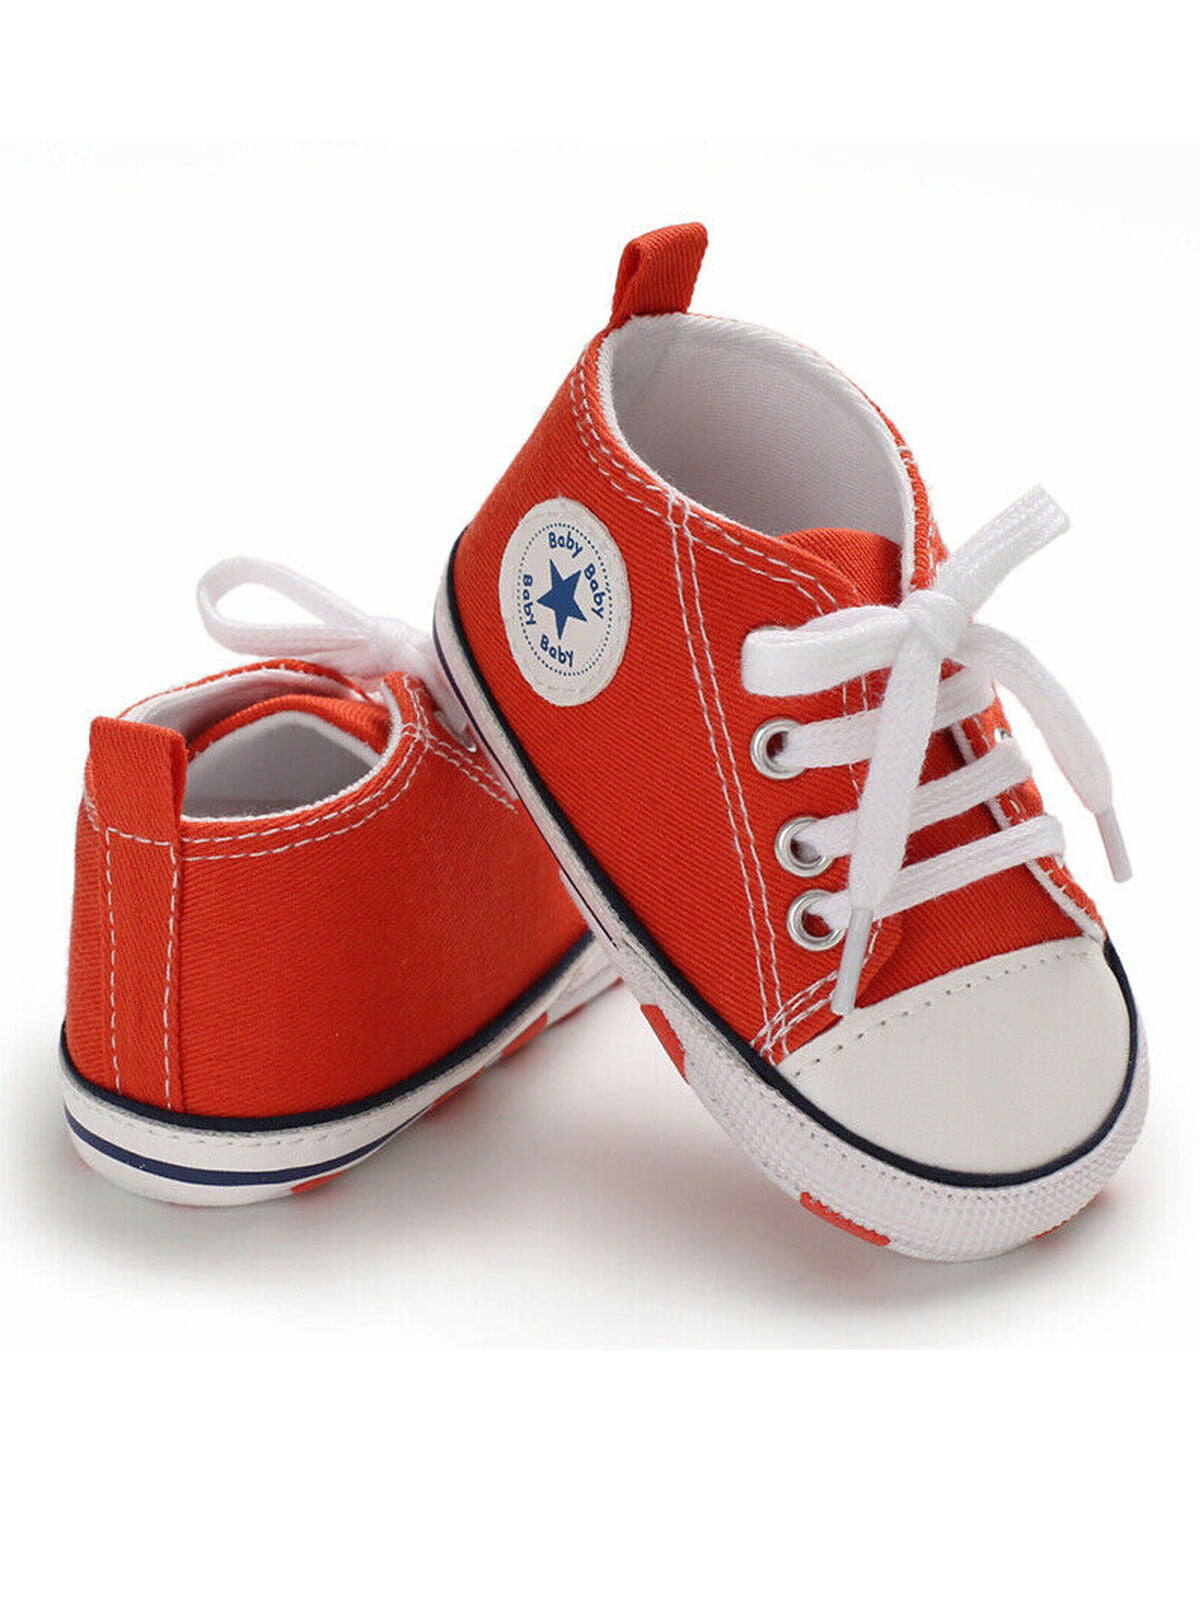 Newborn Baby Bandage Cotton Shoes Toddler First Walkers Kid Shoes Sneaker CA